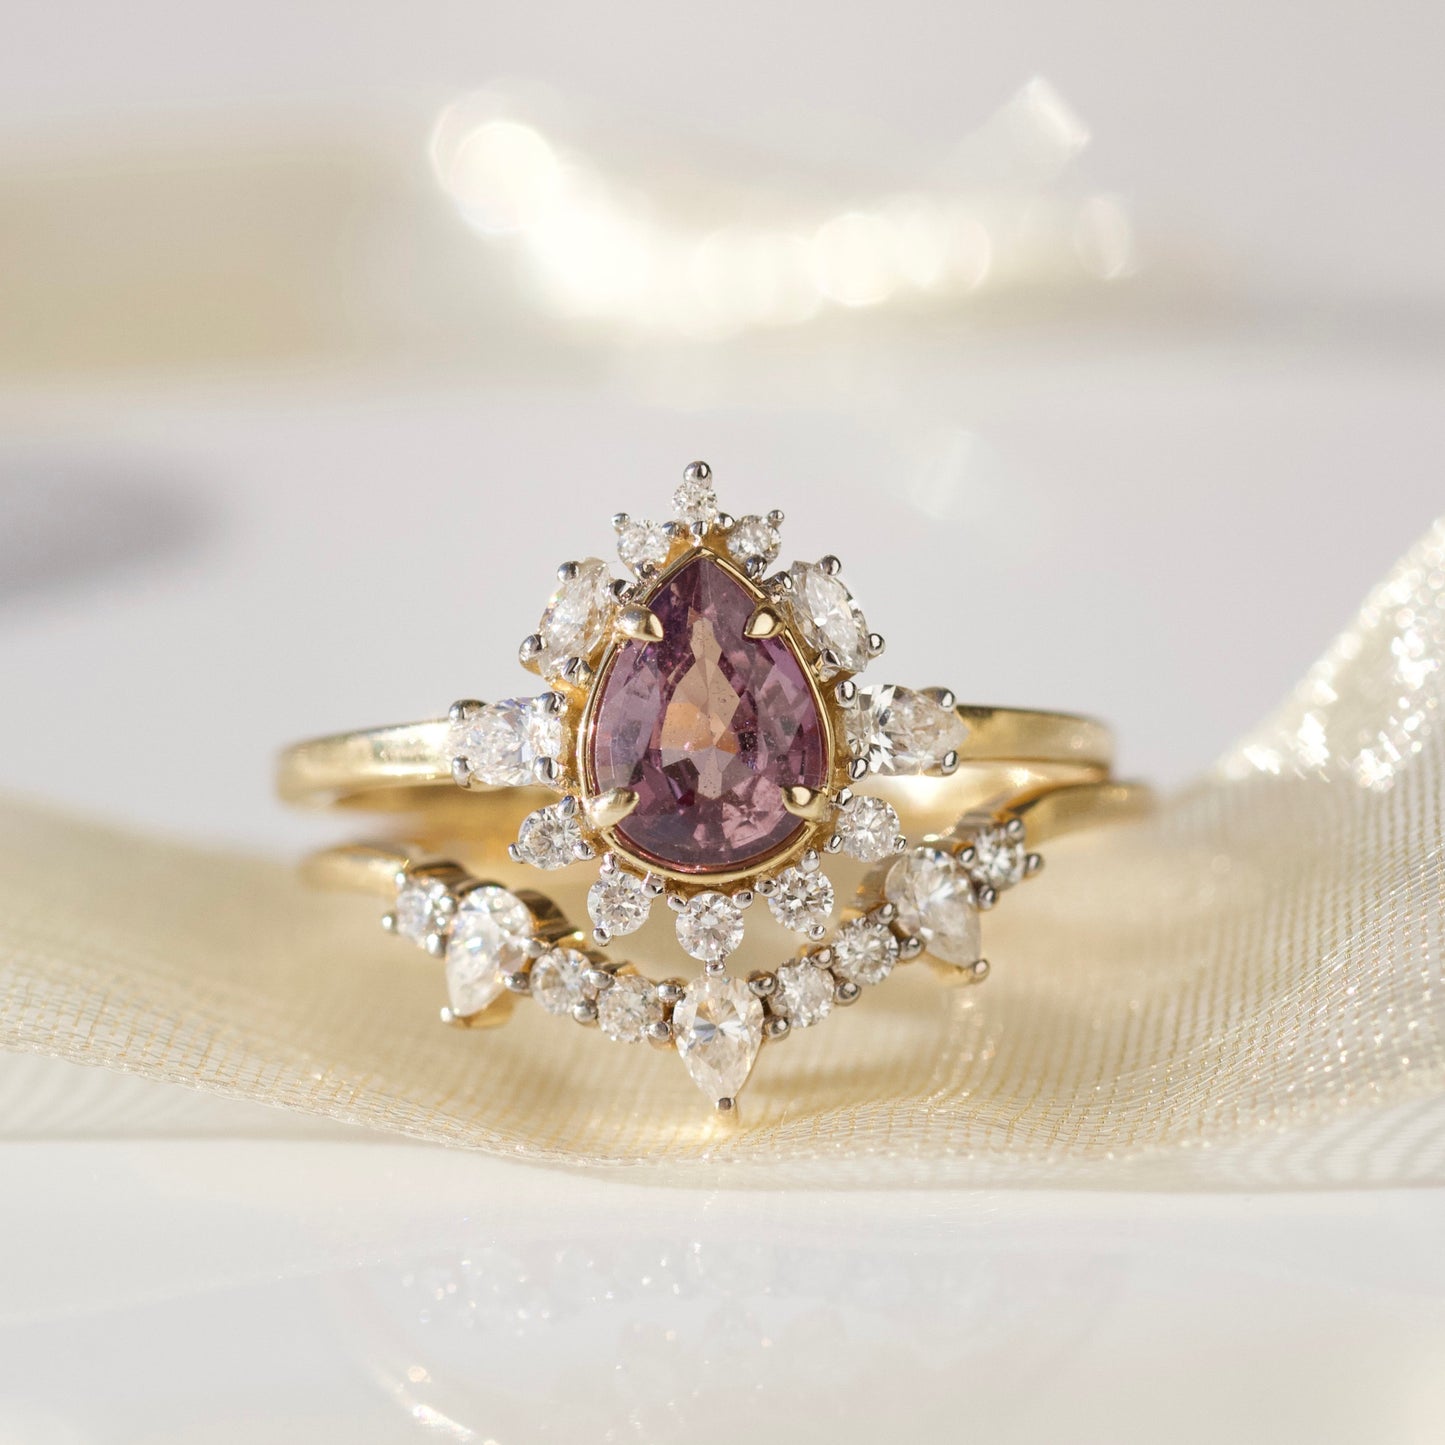 Pink sapphire and diamond ring in 14k solid gold